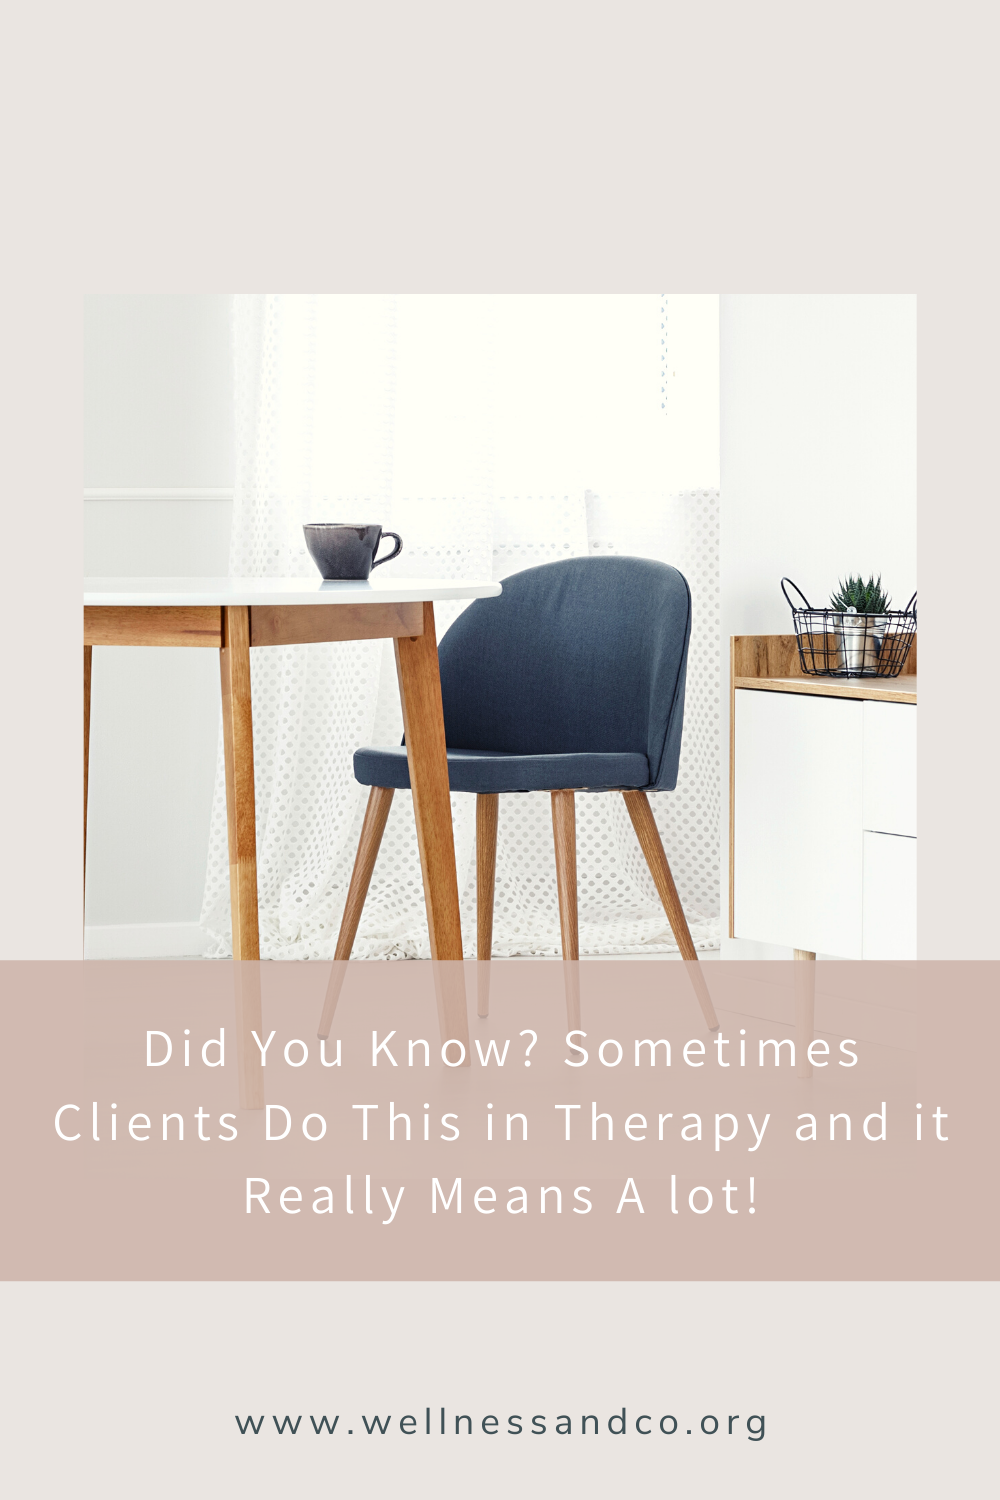 Did You Know? Sometimes Clients Do This in Therapy and it Really Means A lot! | This post explores, in poem form, something positive clients do in therapy that really can mean a lot to a therapist - giving feedback! Dive deeper into how that feedback can be useful for therapy and impact the therapist. I’ve had the joy of receiving positive feedback from several clients and today I share how those words swirl around in my head. Cheers!